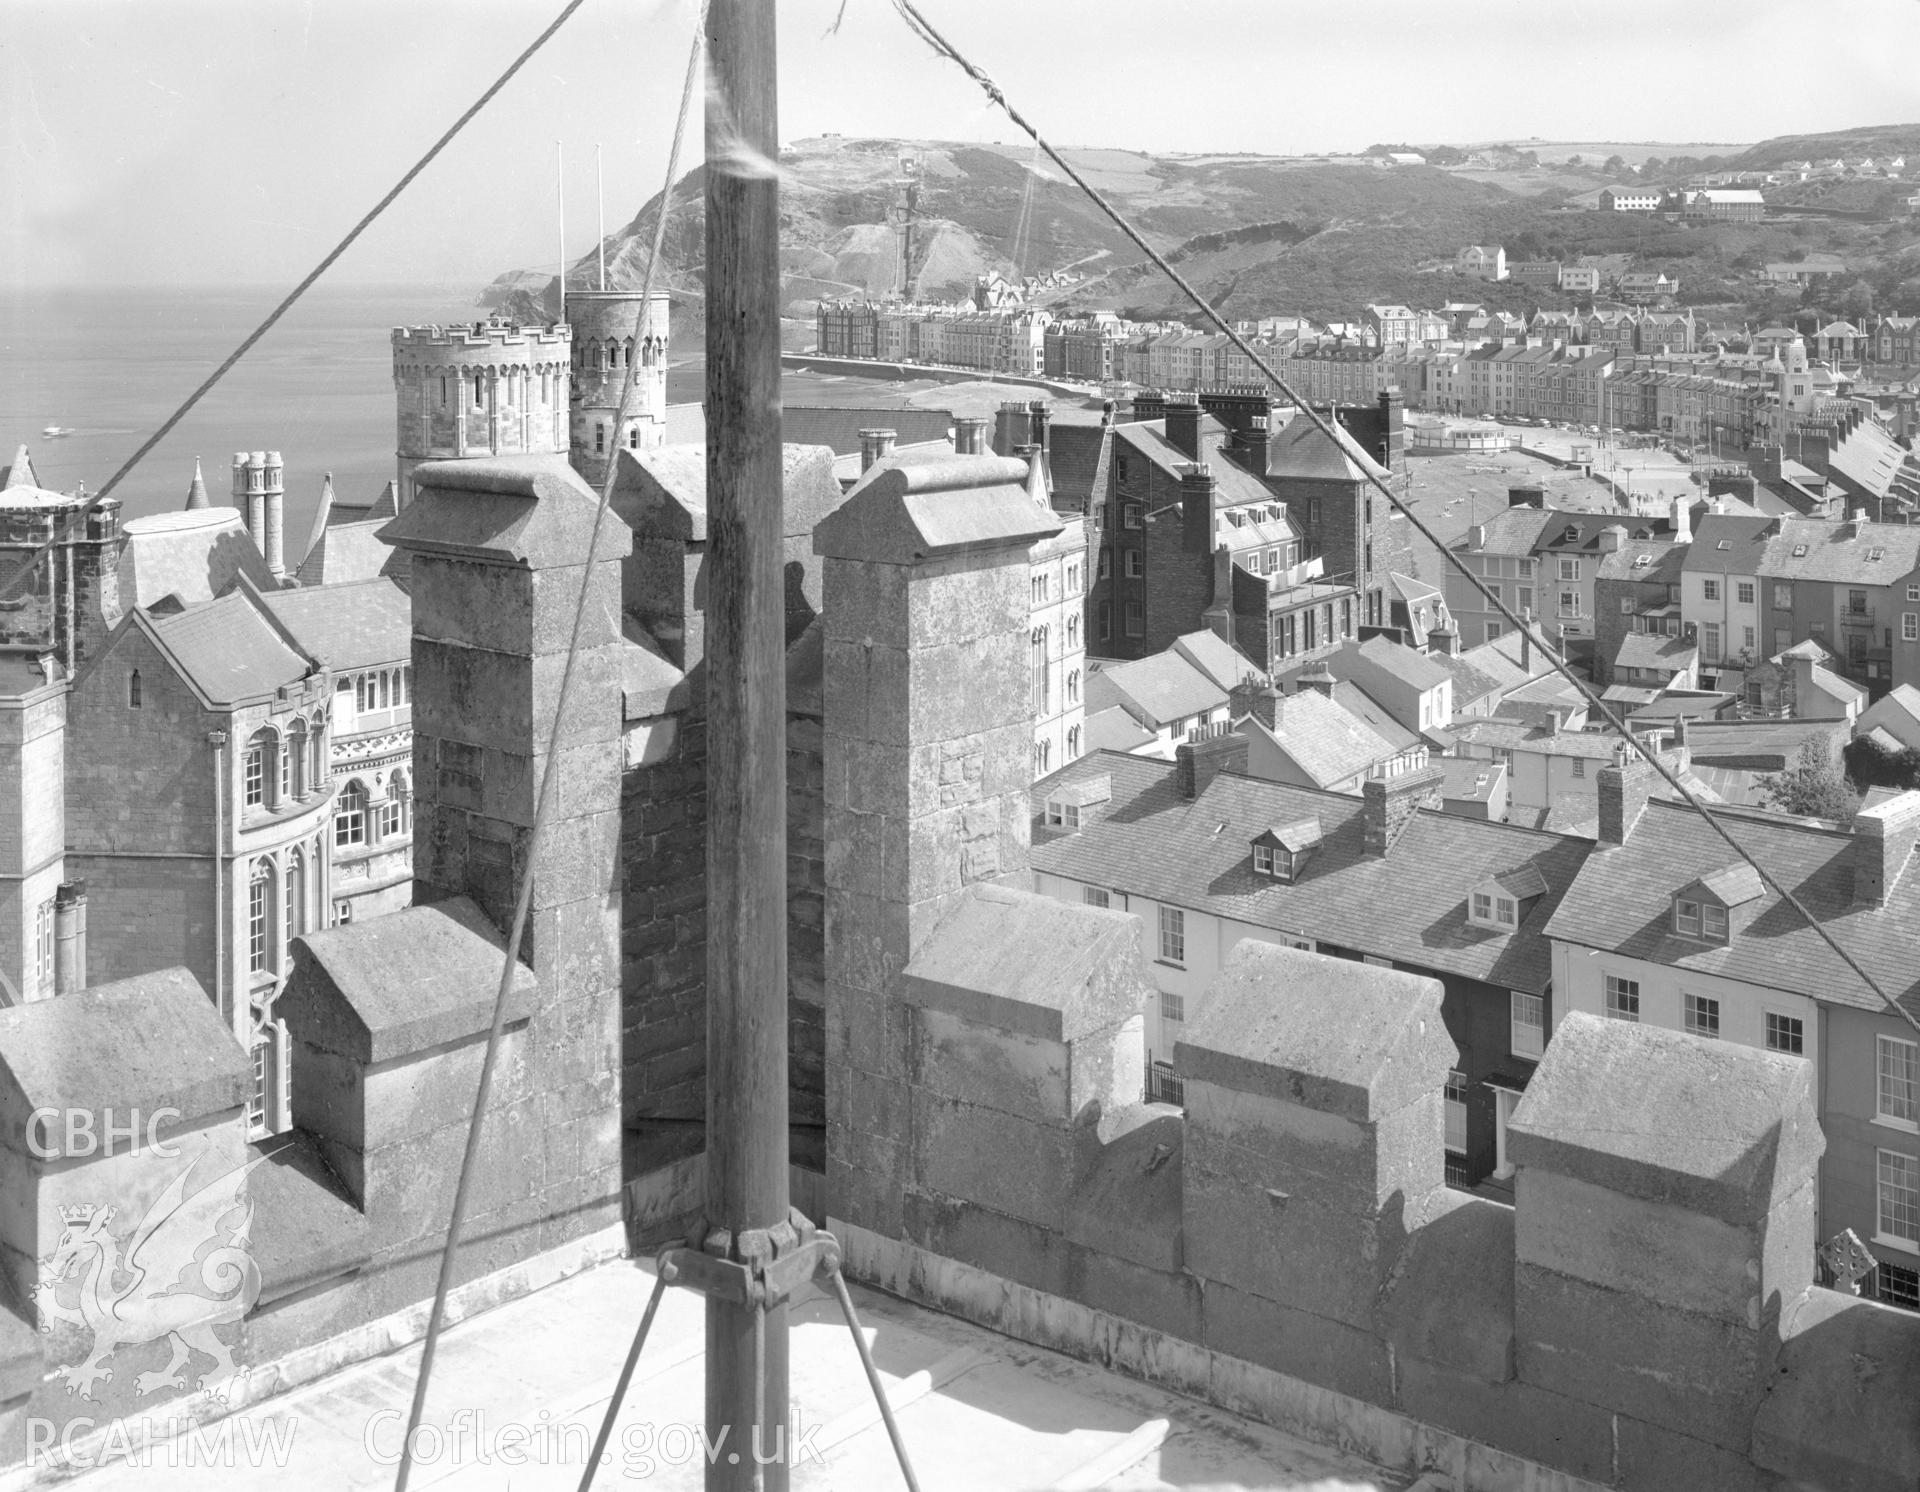 Black and white acetate negative showing a view of Aberystwyth.